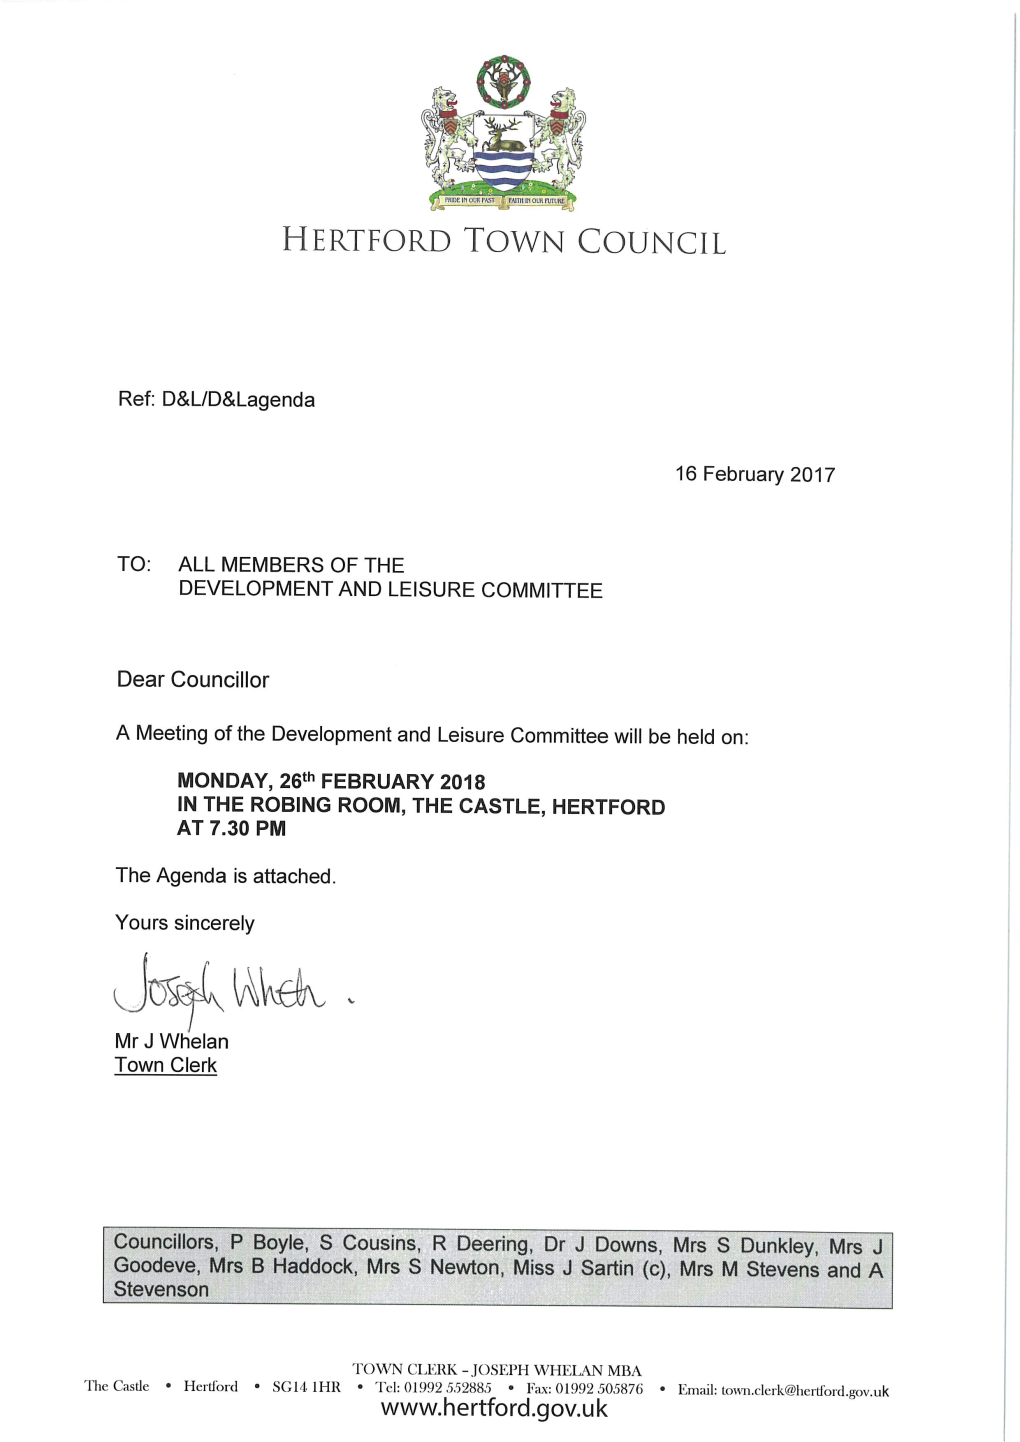 Agenda - Meeting of the Development and Leisure Committee to Be Held on Monday, 26 February 2018 at 7.30Pm in the Robing Room, the Castle, Hertford